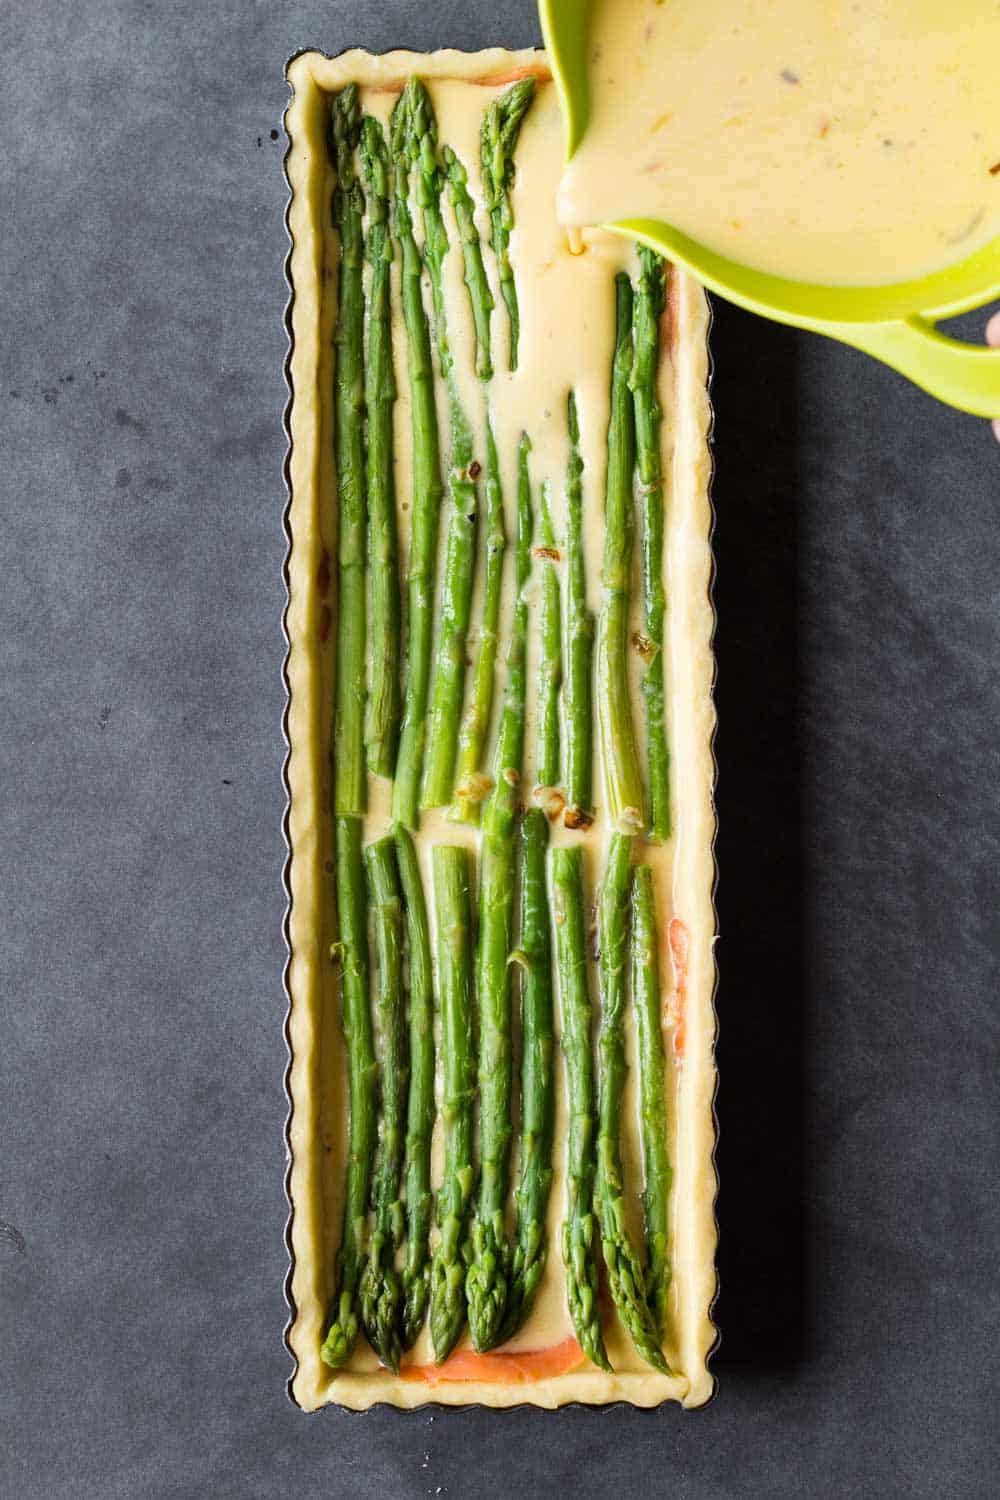 pouring egg batter into a tart pan over asparagus spears to make quiche